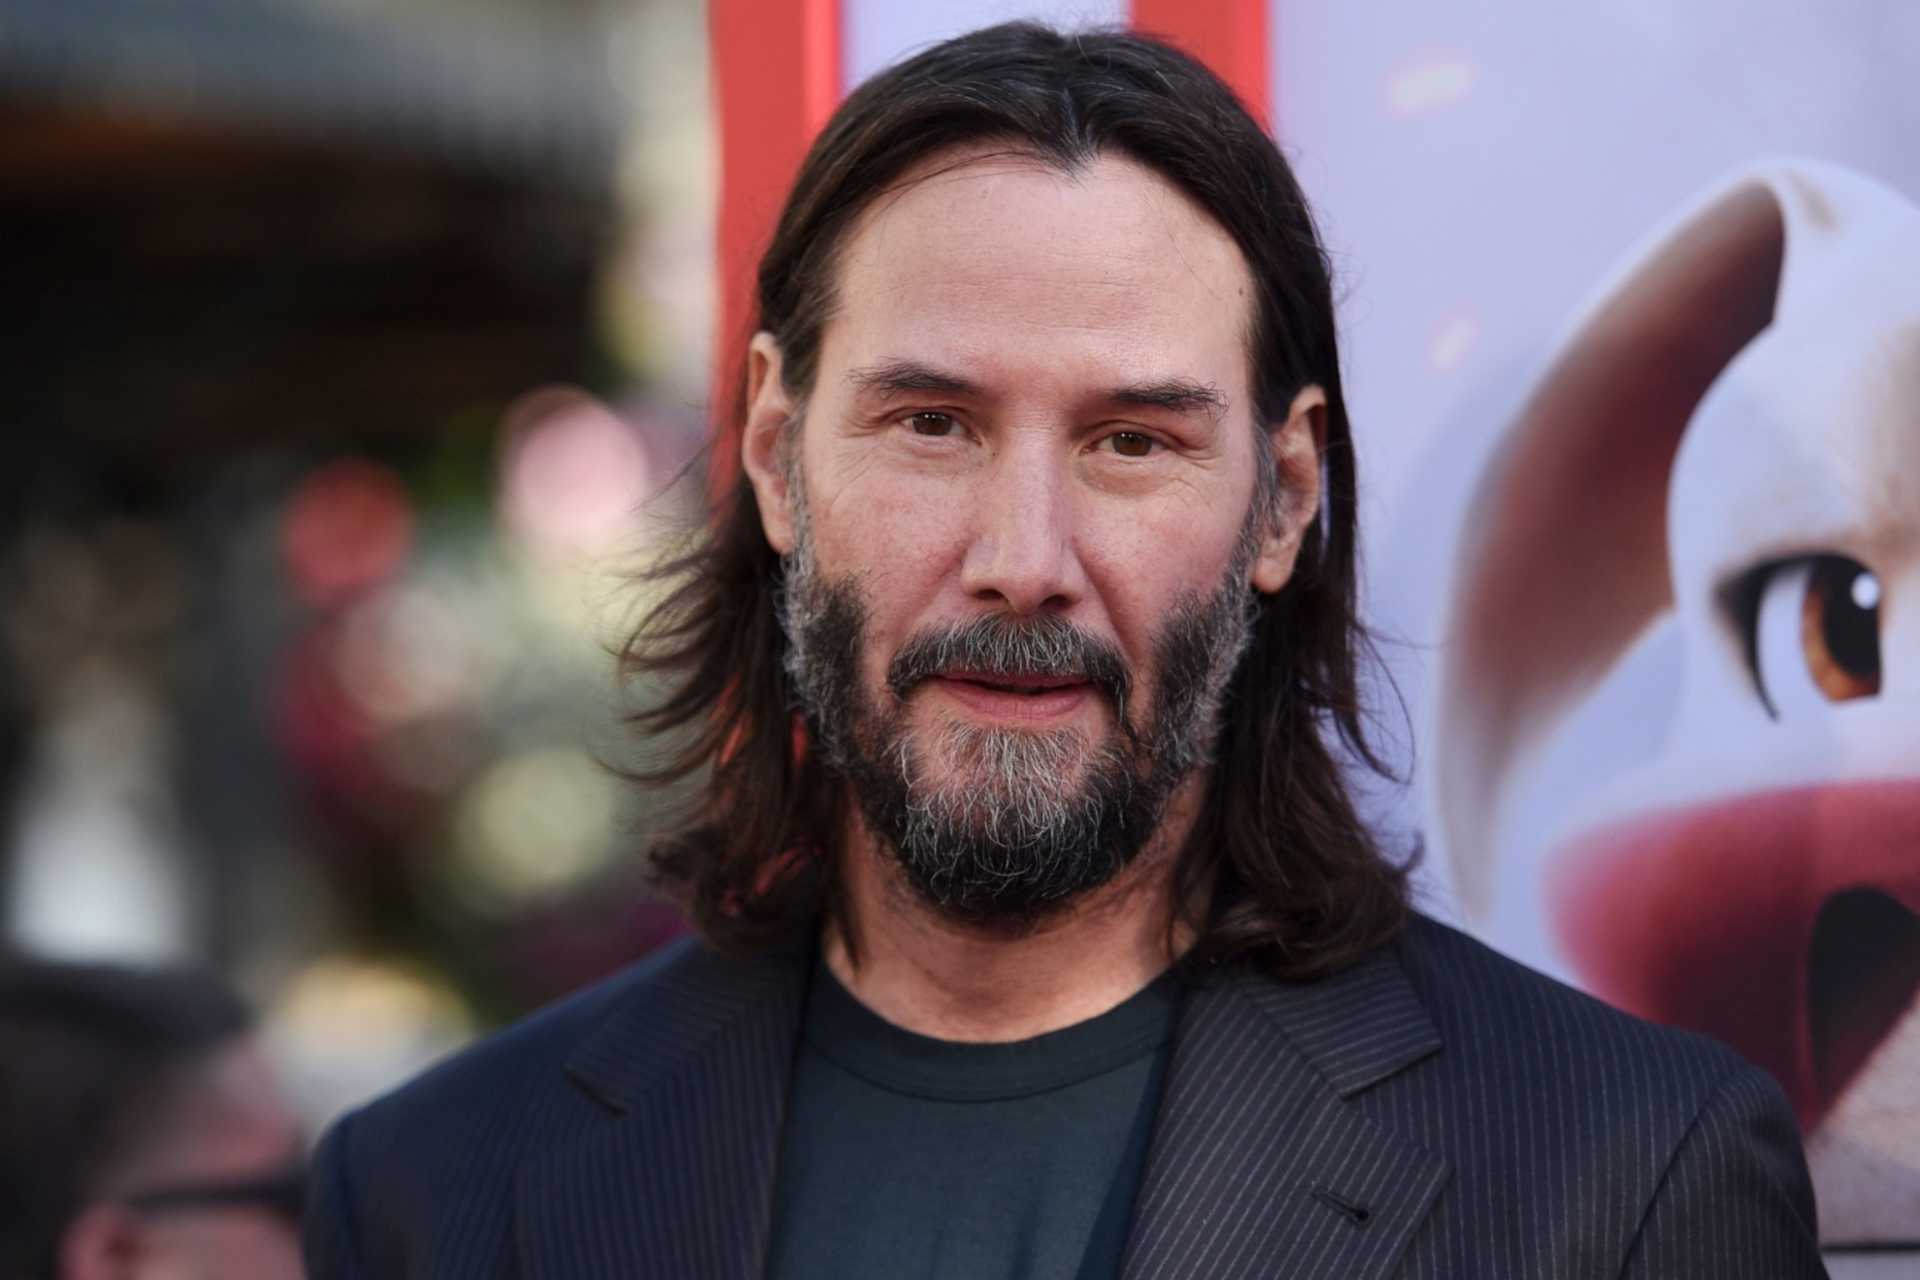 Keanu Reeves Recalls 'Bill & Ted' Audition: 'Reminded me of a Roman Orgy